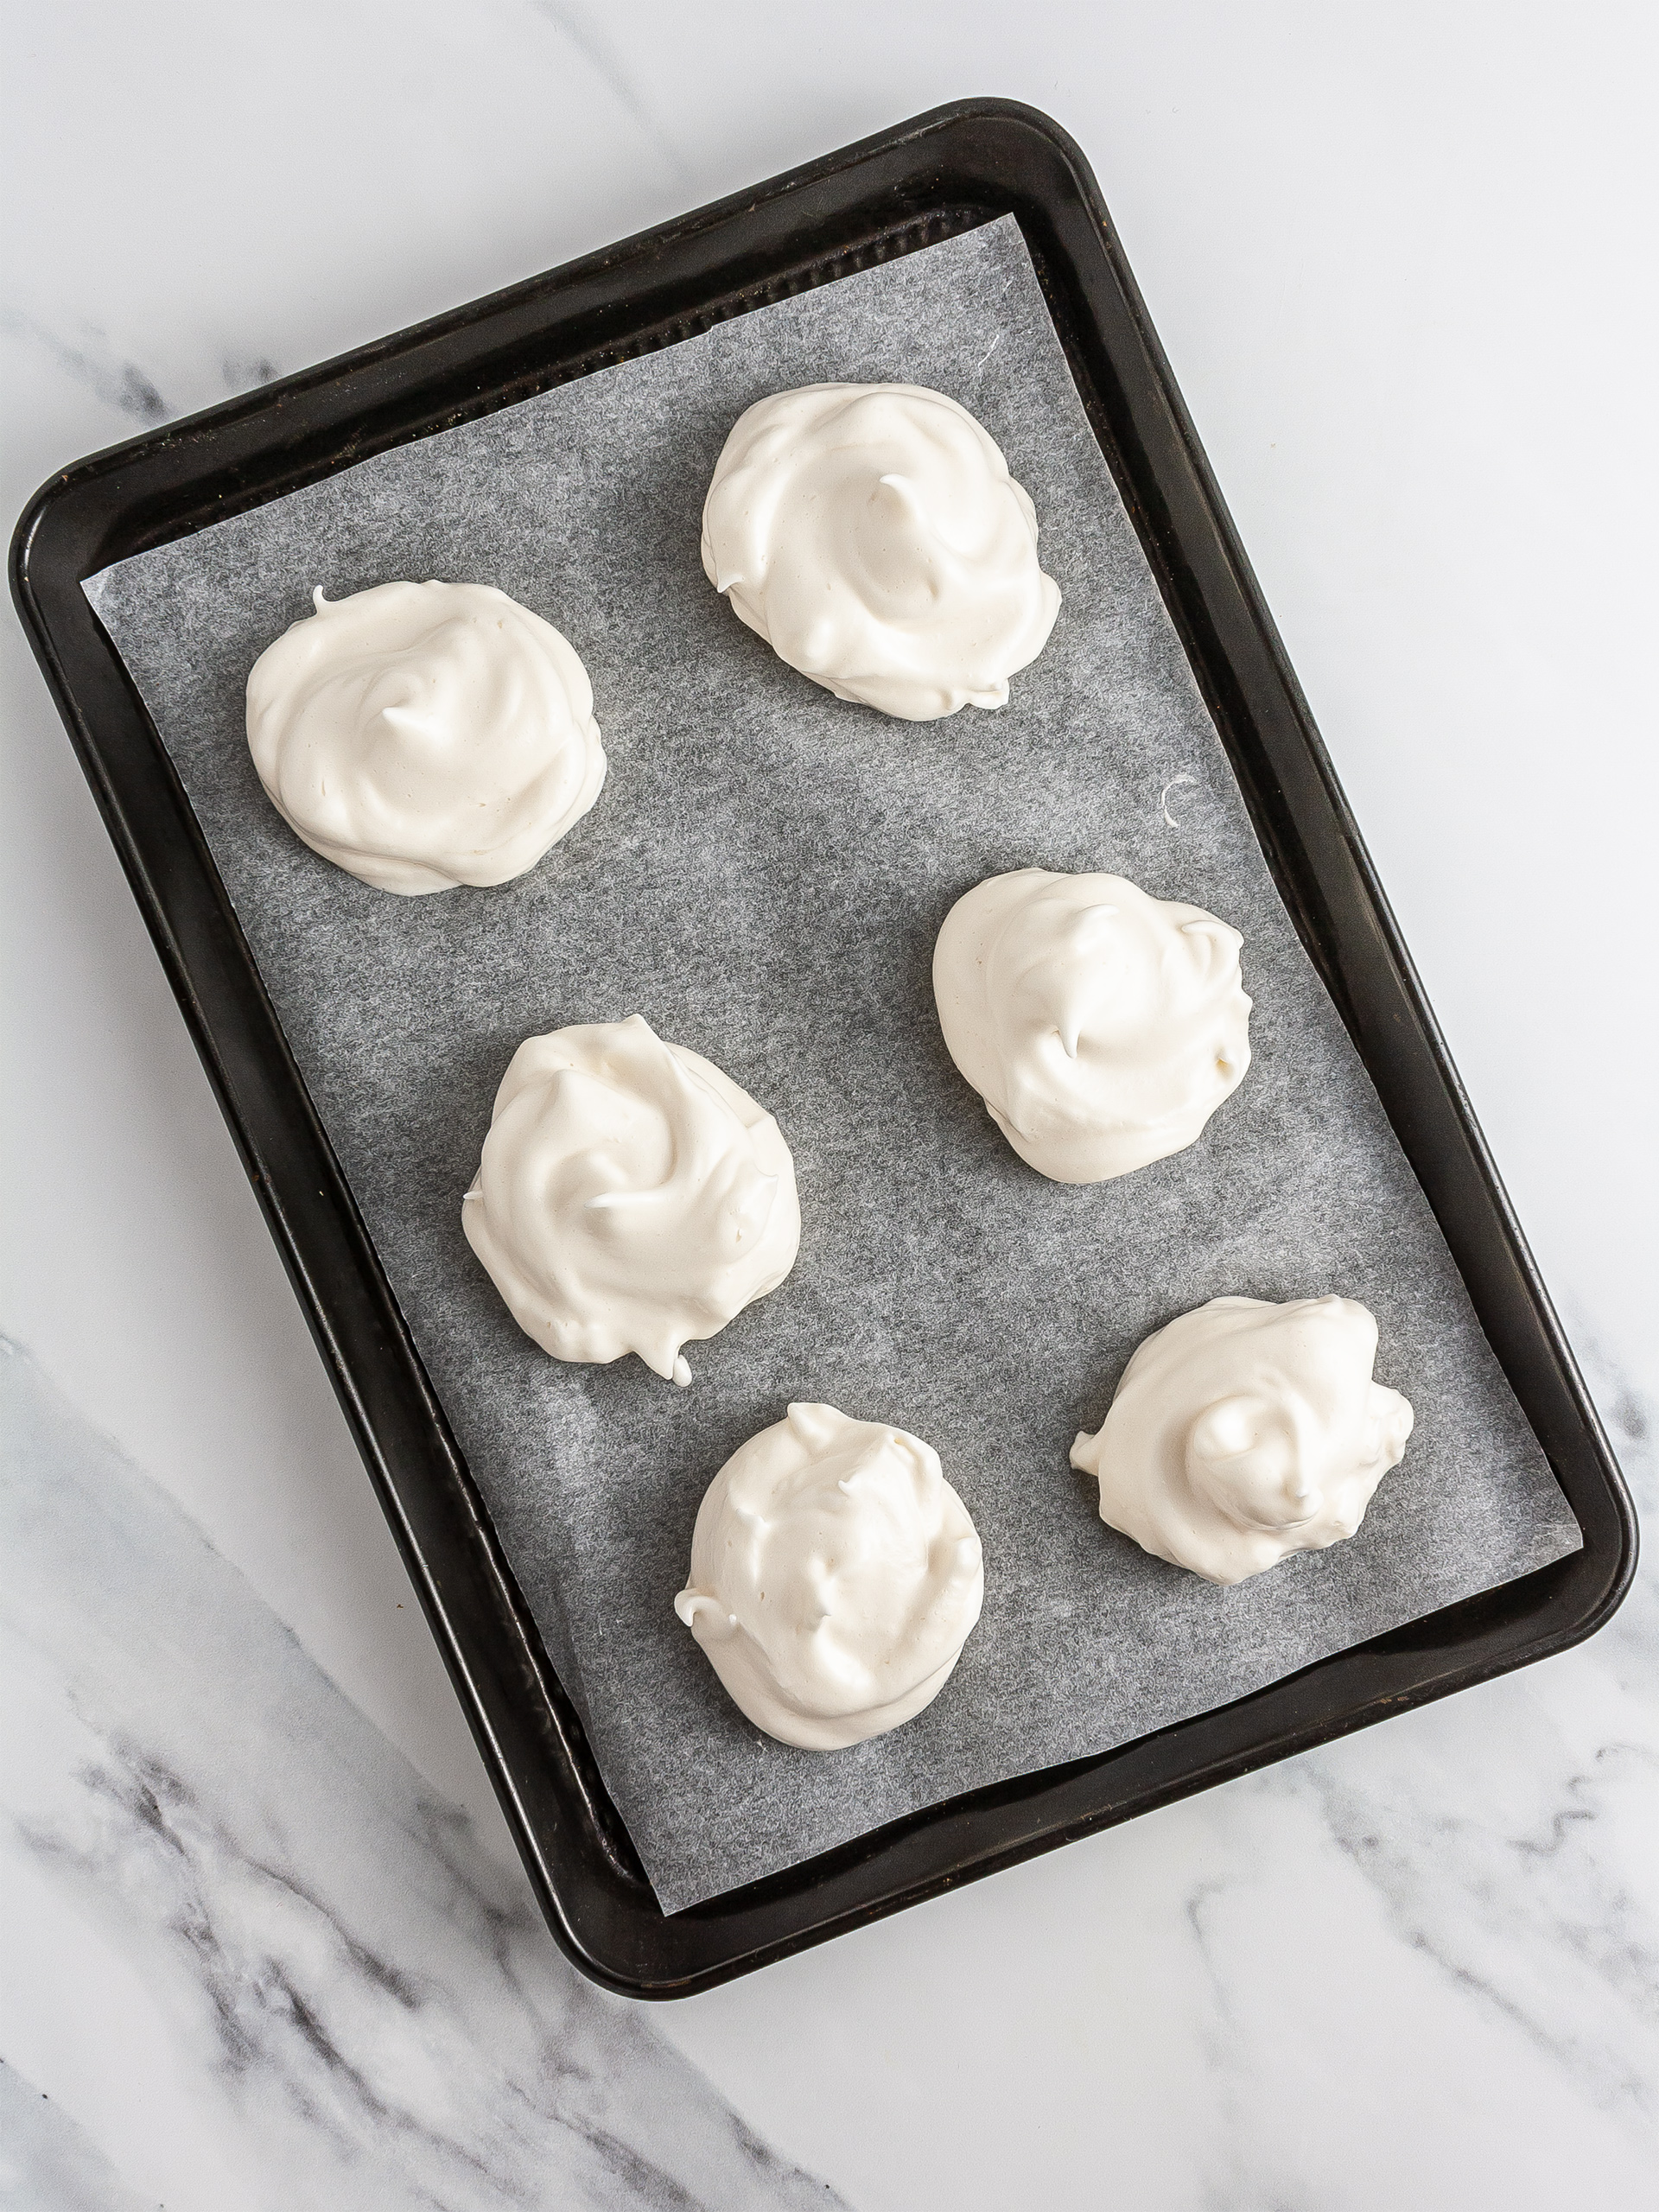 Meringues on a baking tray